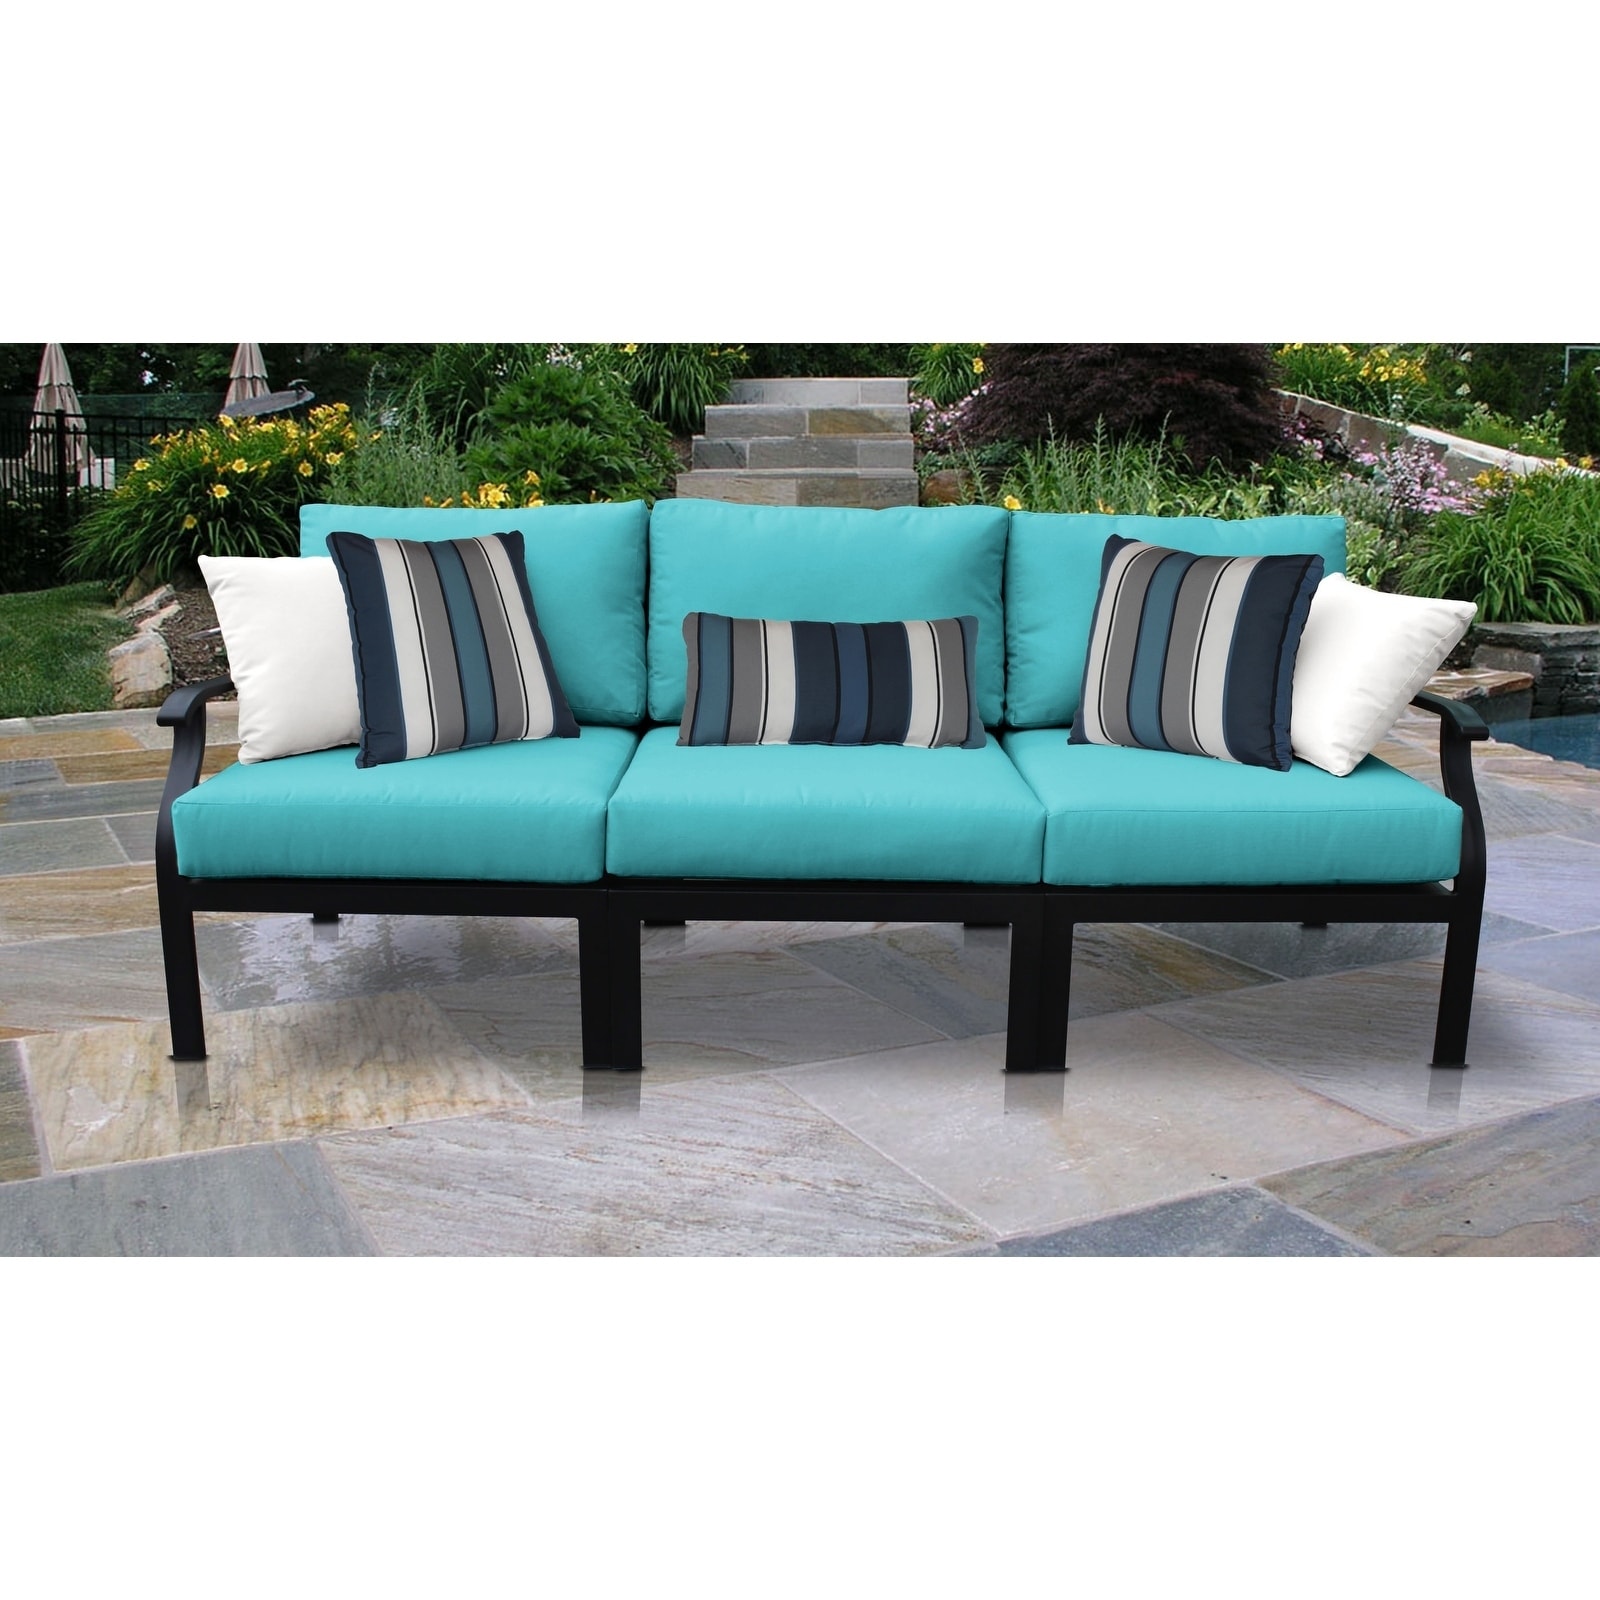 Kathy Ireland Homes and Gardens Madison Ave. 3 Piece Outdoor Aluminum Patio Furniture Set